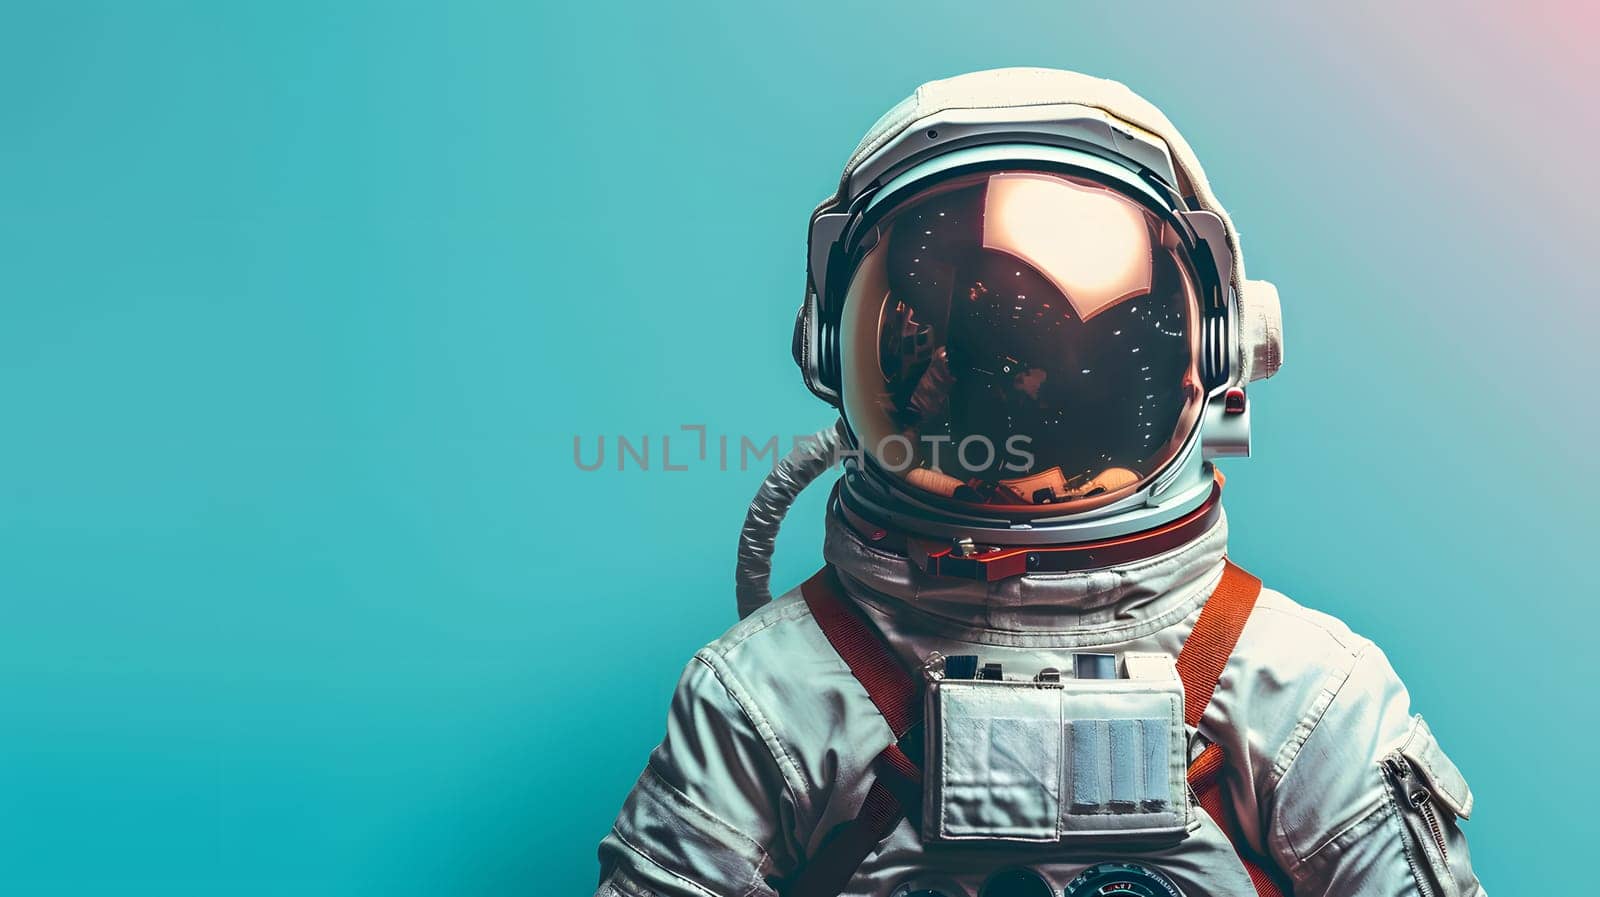 A close up of an astronaut in a helmet and sports gear against an electric blue background. The helmet is a fashion accessory and personal protective equipment for space exploration